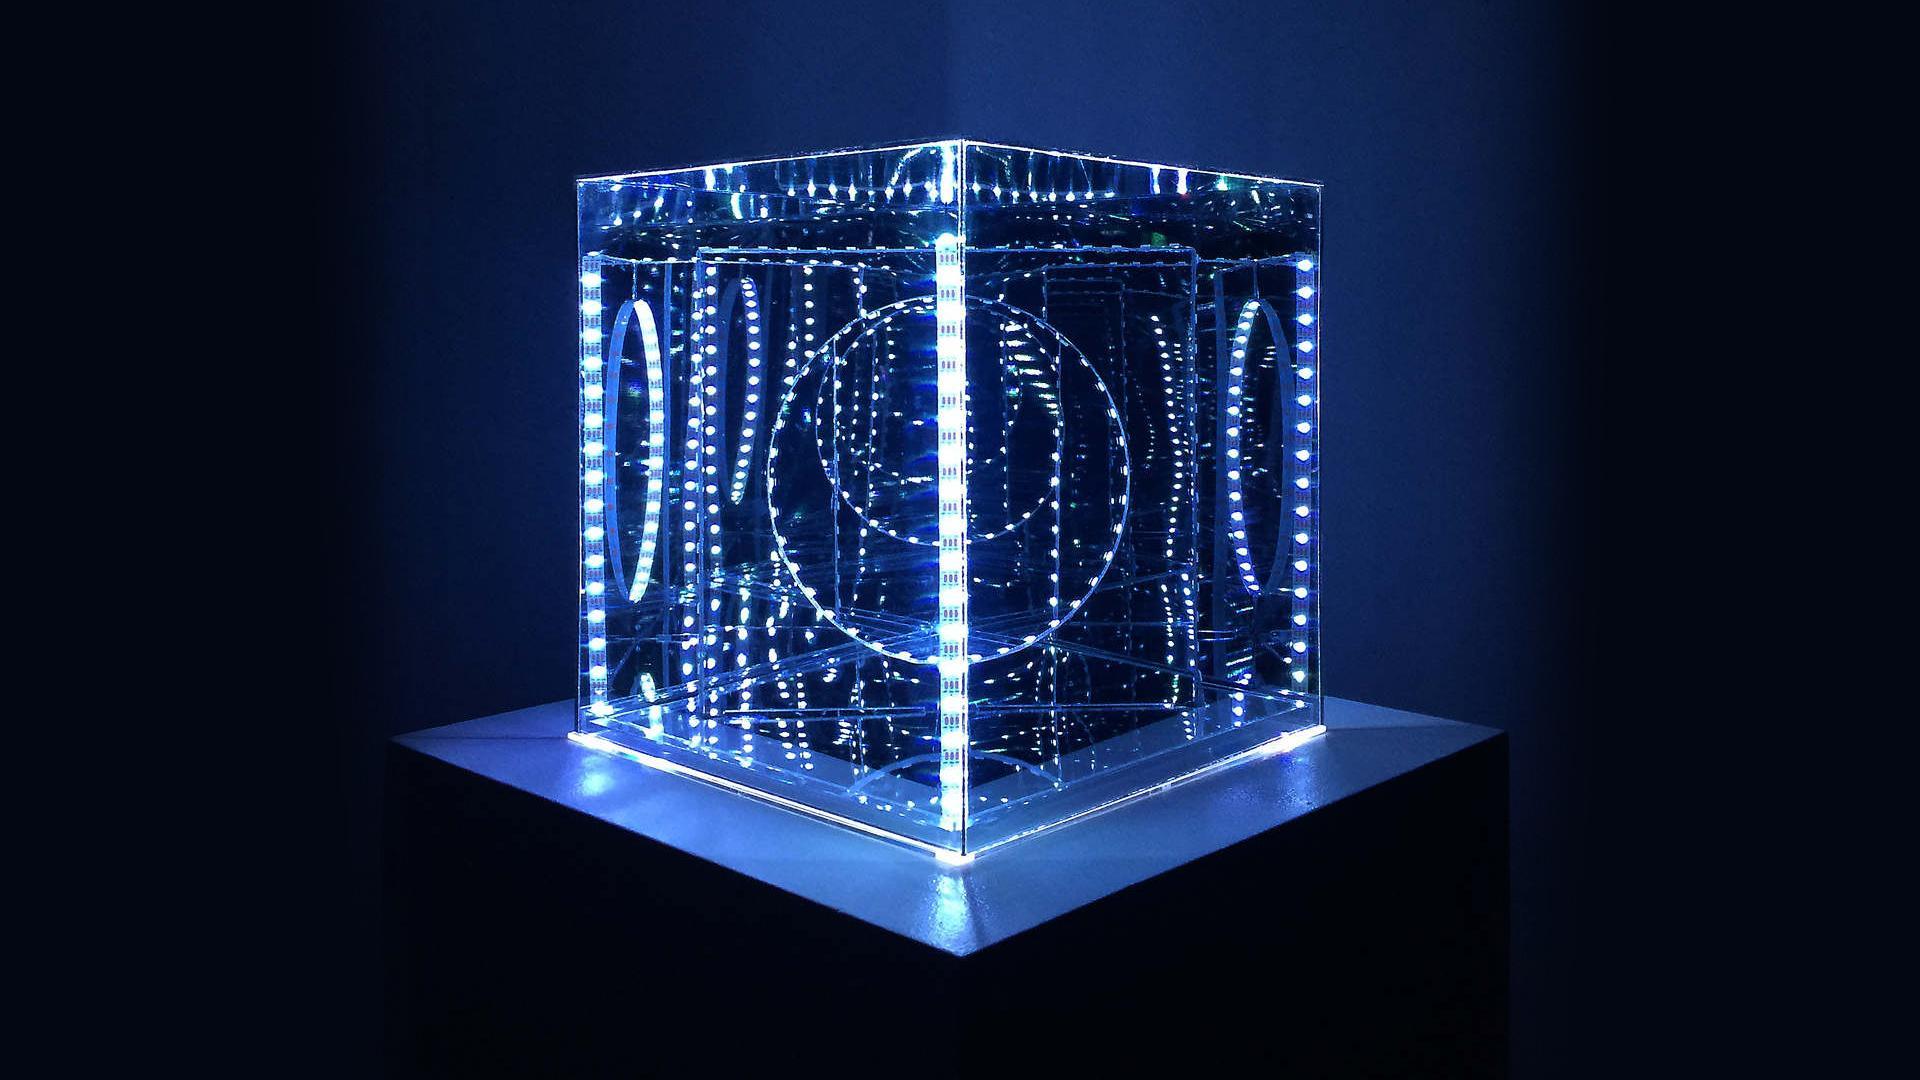 A clear box with blue lights and circles cut into it in a dark room.